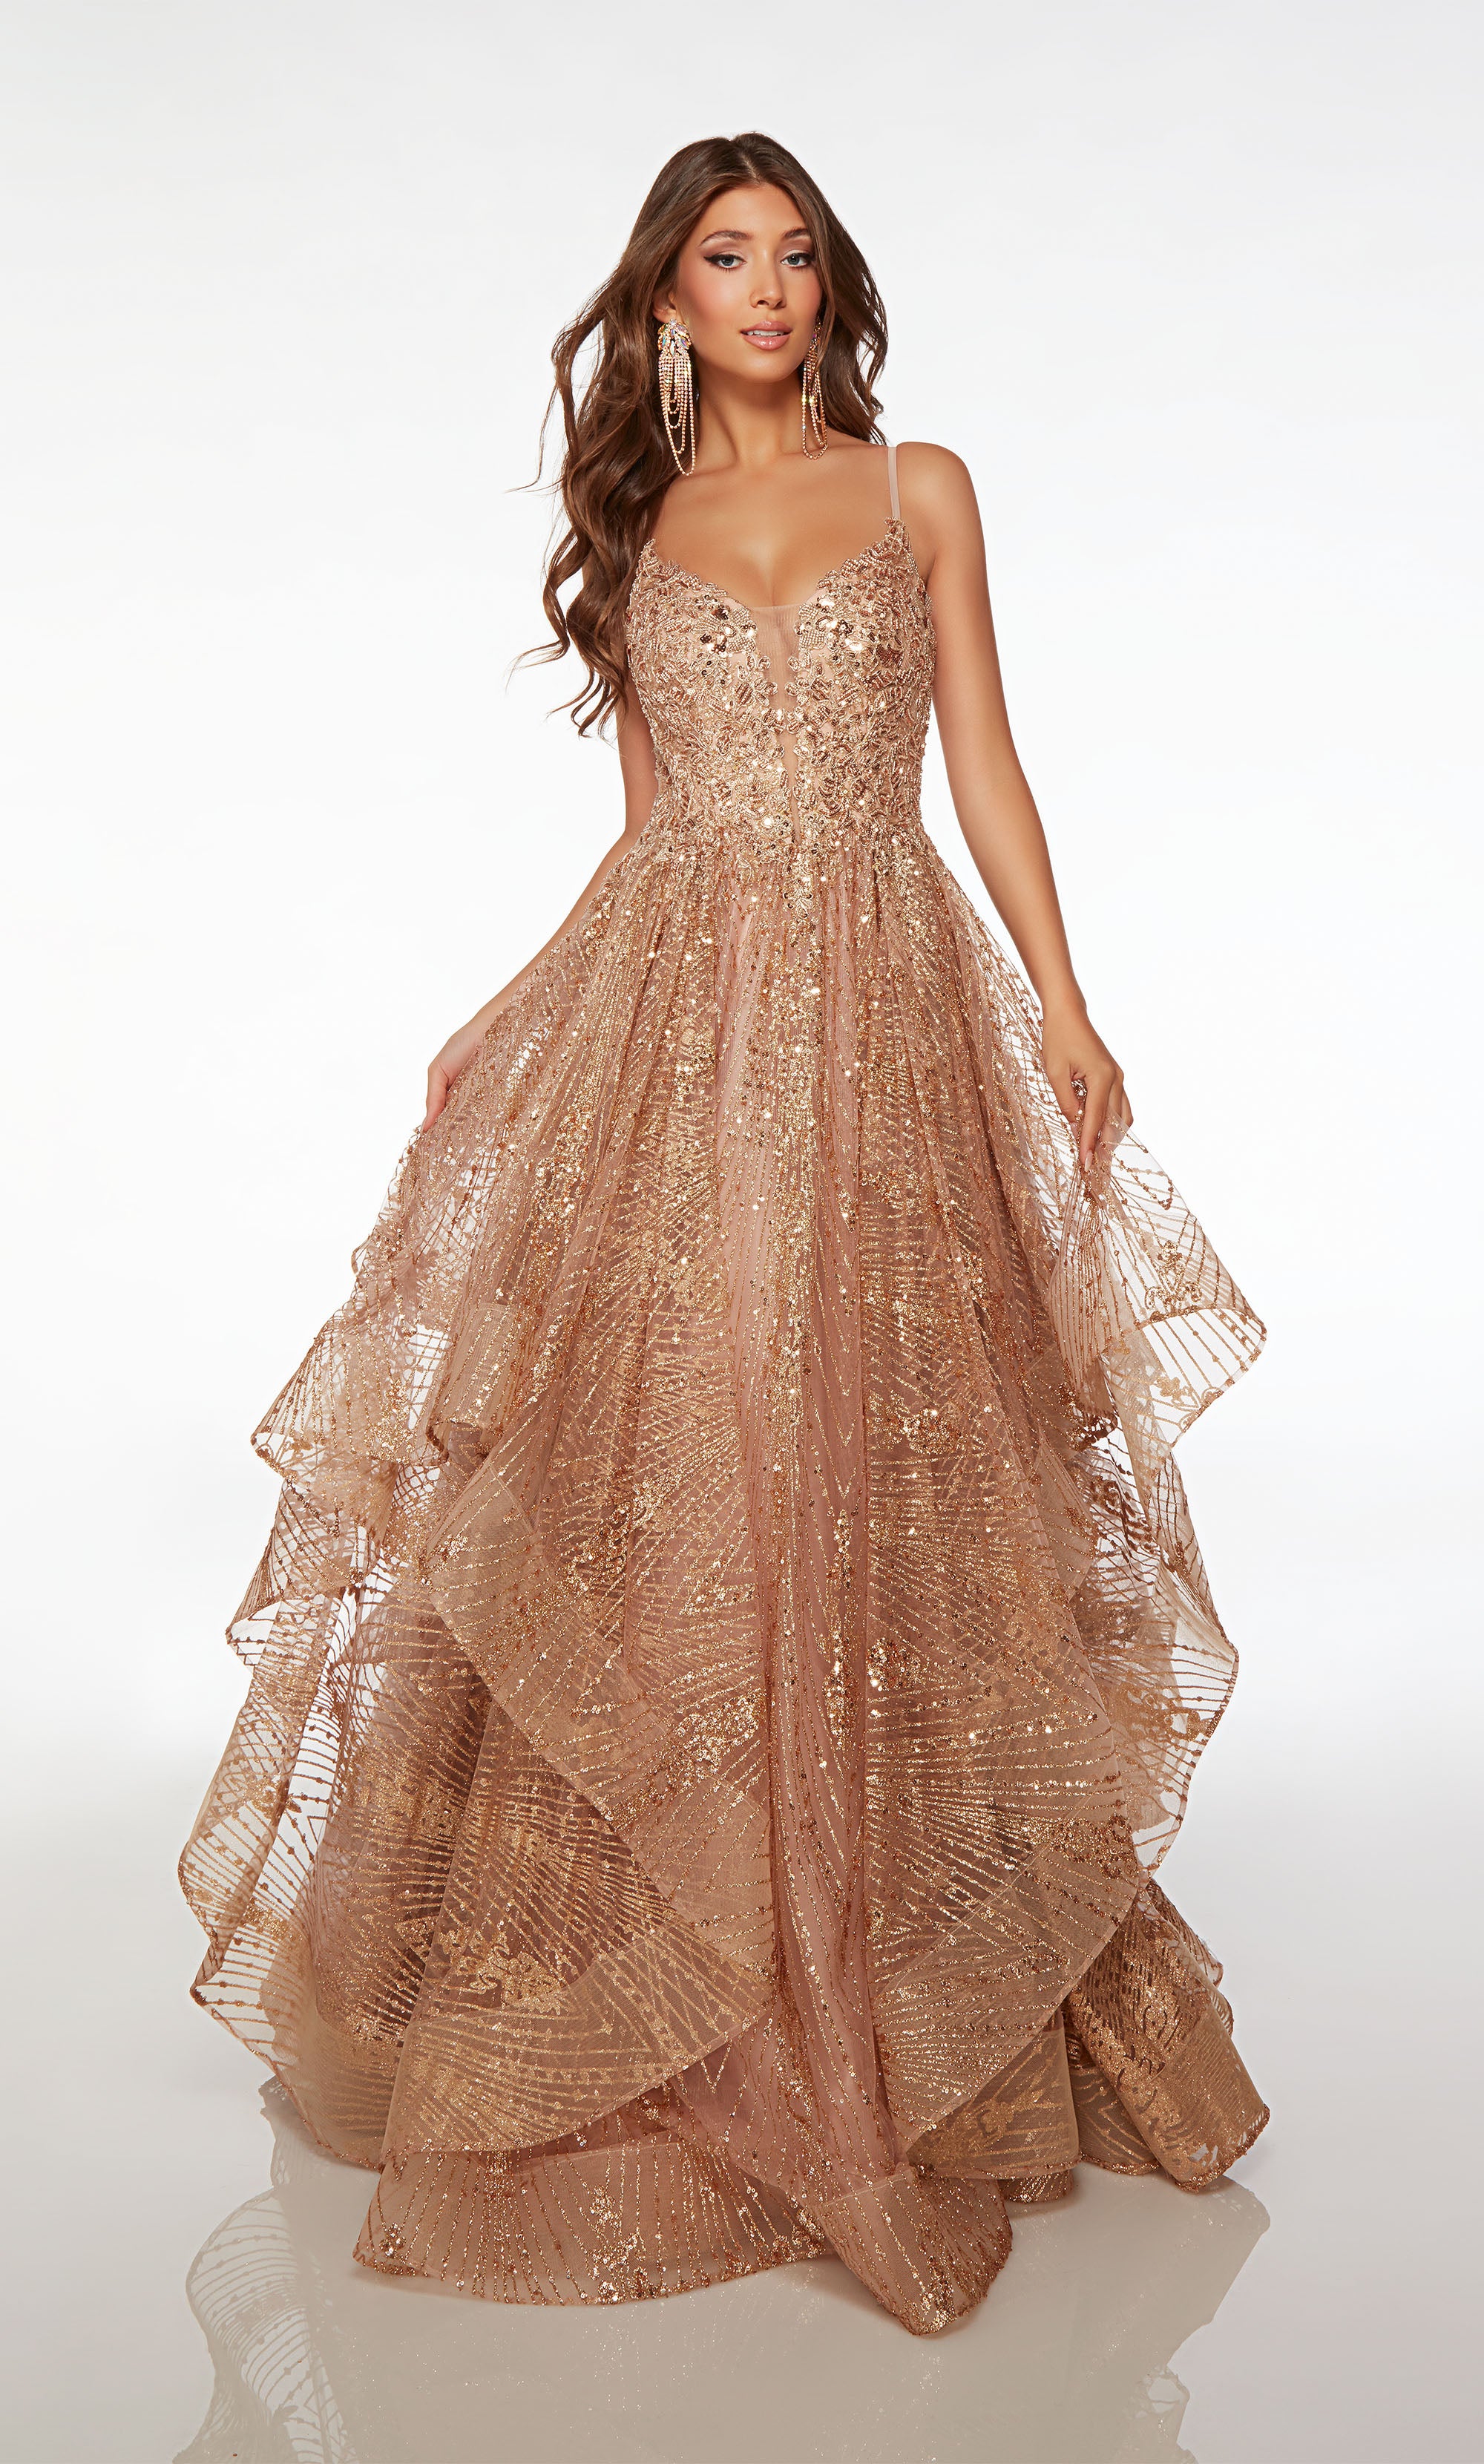 Rose gold glitter tulle ball gown with an plunging neckline, beaded lace bodice, adjustable straps, ruffled skirt, and an slight train for an glamorous look.